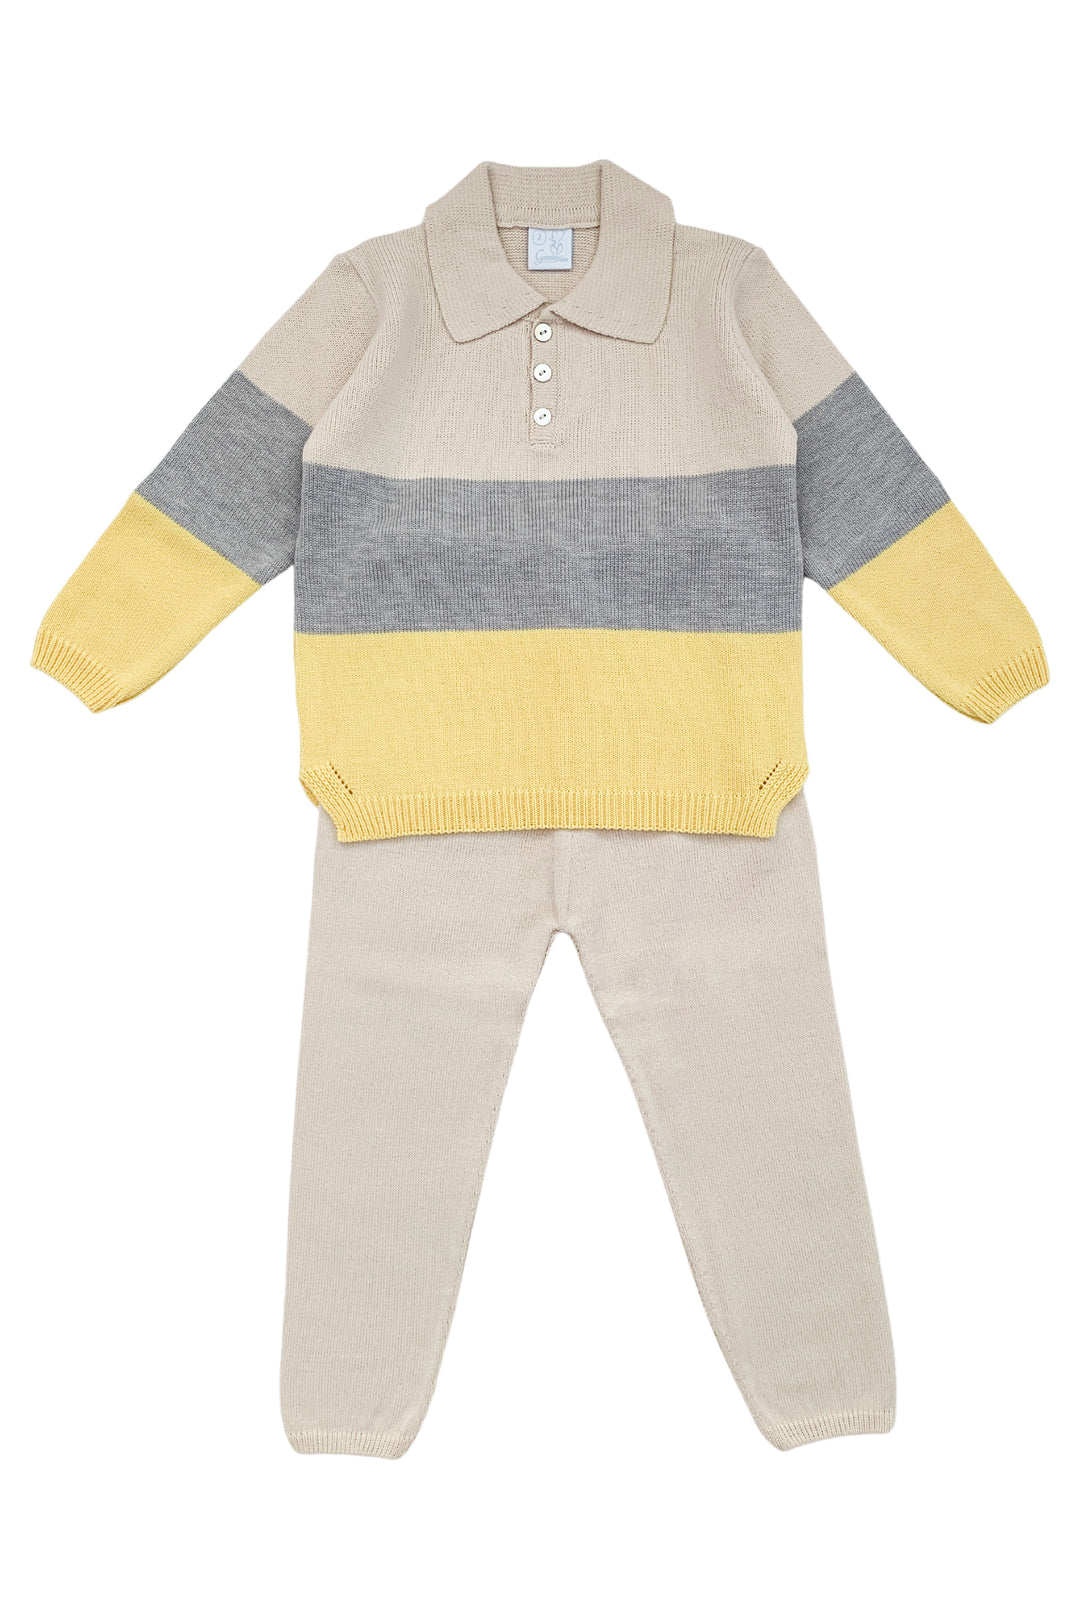 Granlei "Albert" Stone & Yellow Striped Knit Top & Trousers | Millie and John